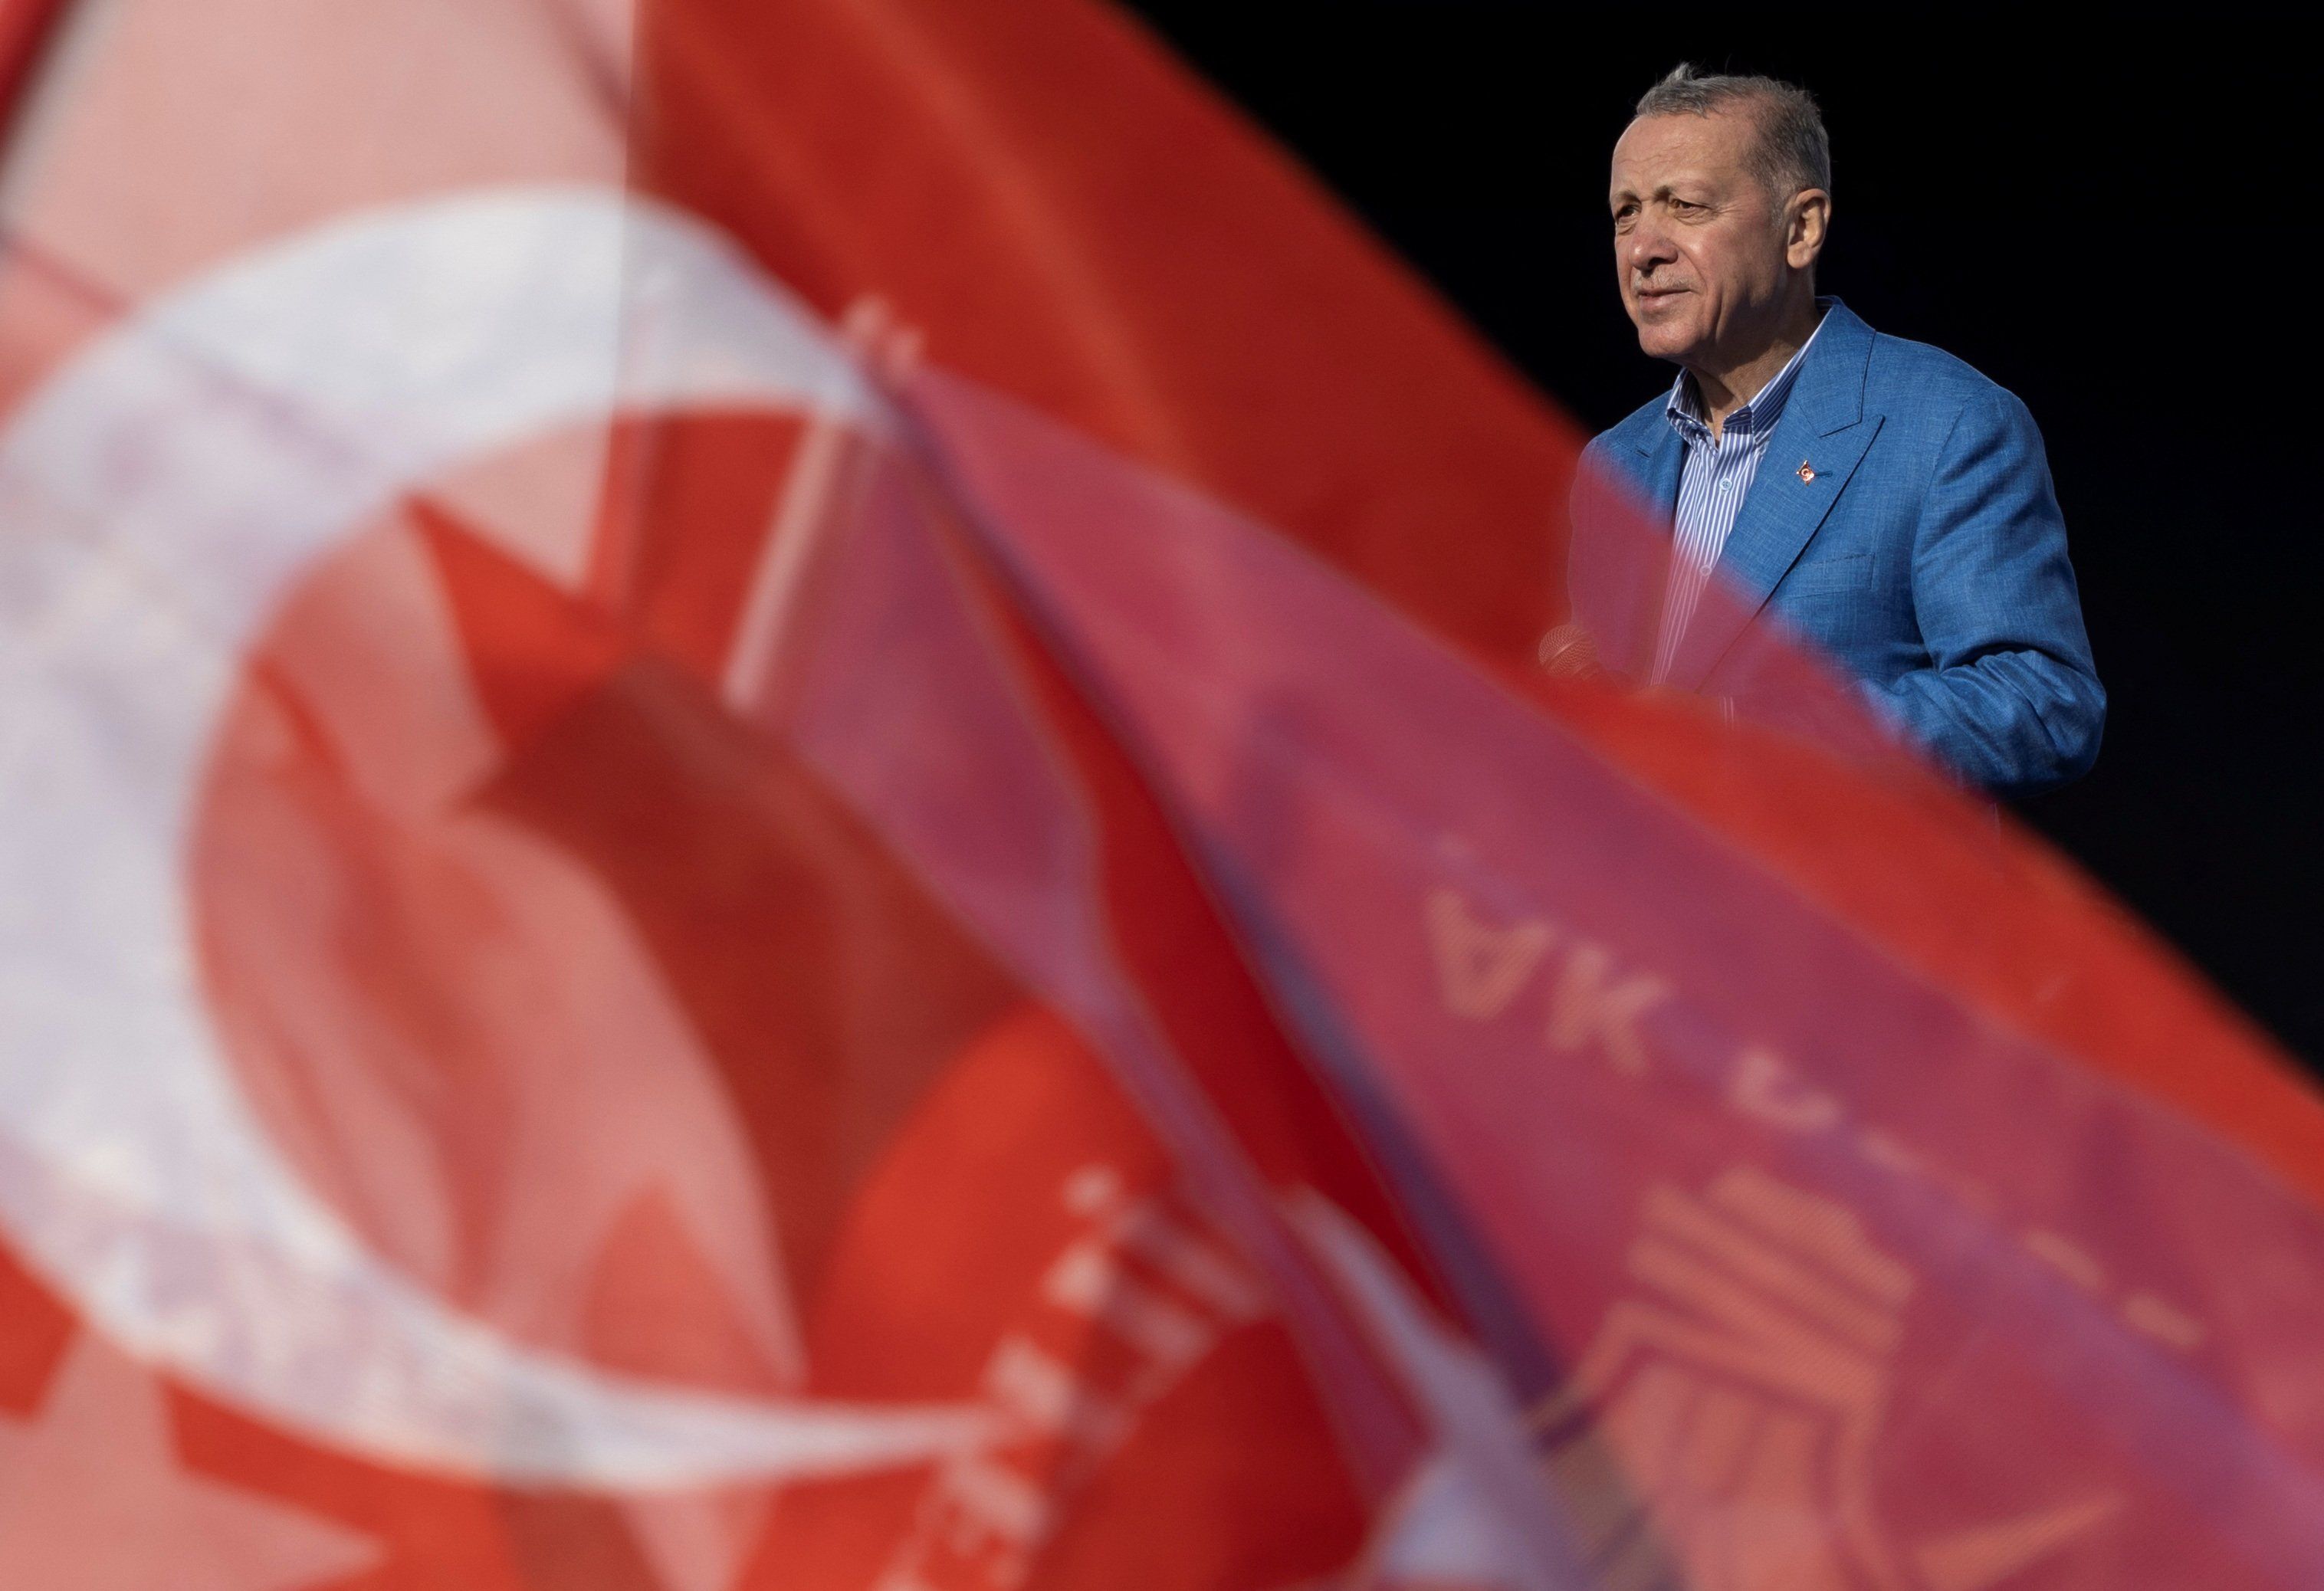 Turkish President Tayyip Erdogan addresses his supporters during a rally ahead of the May 14 election in Istanbul.